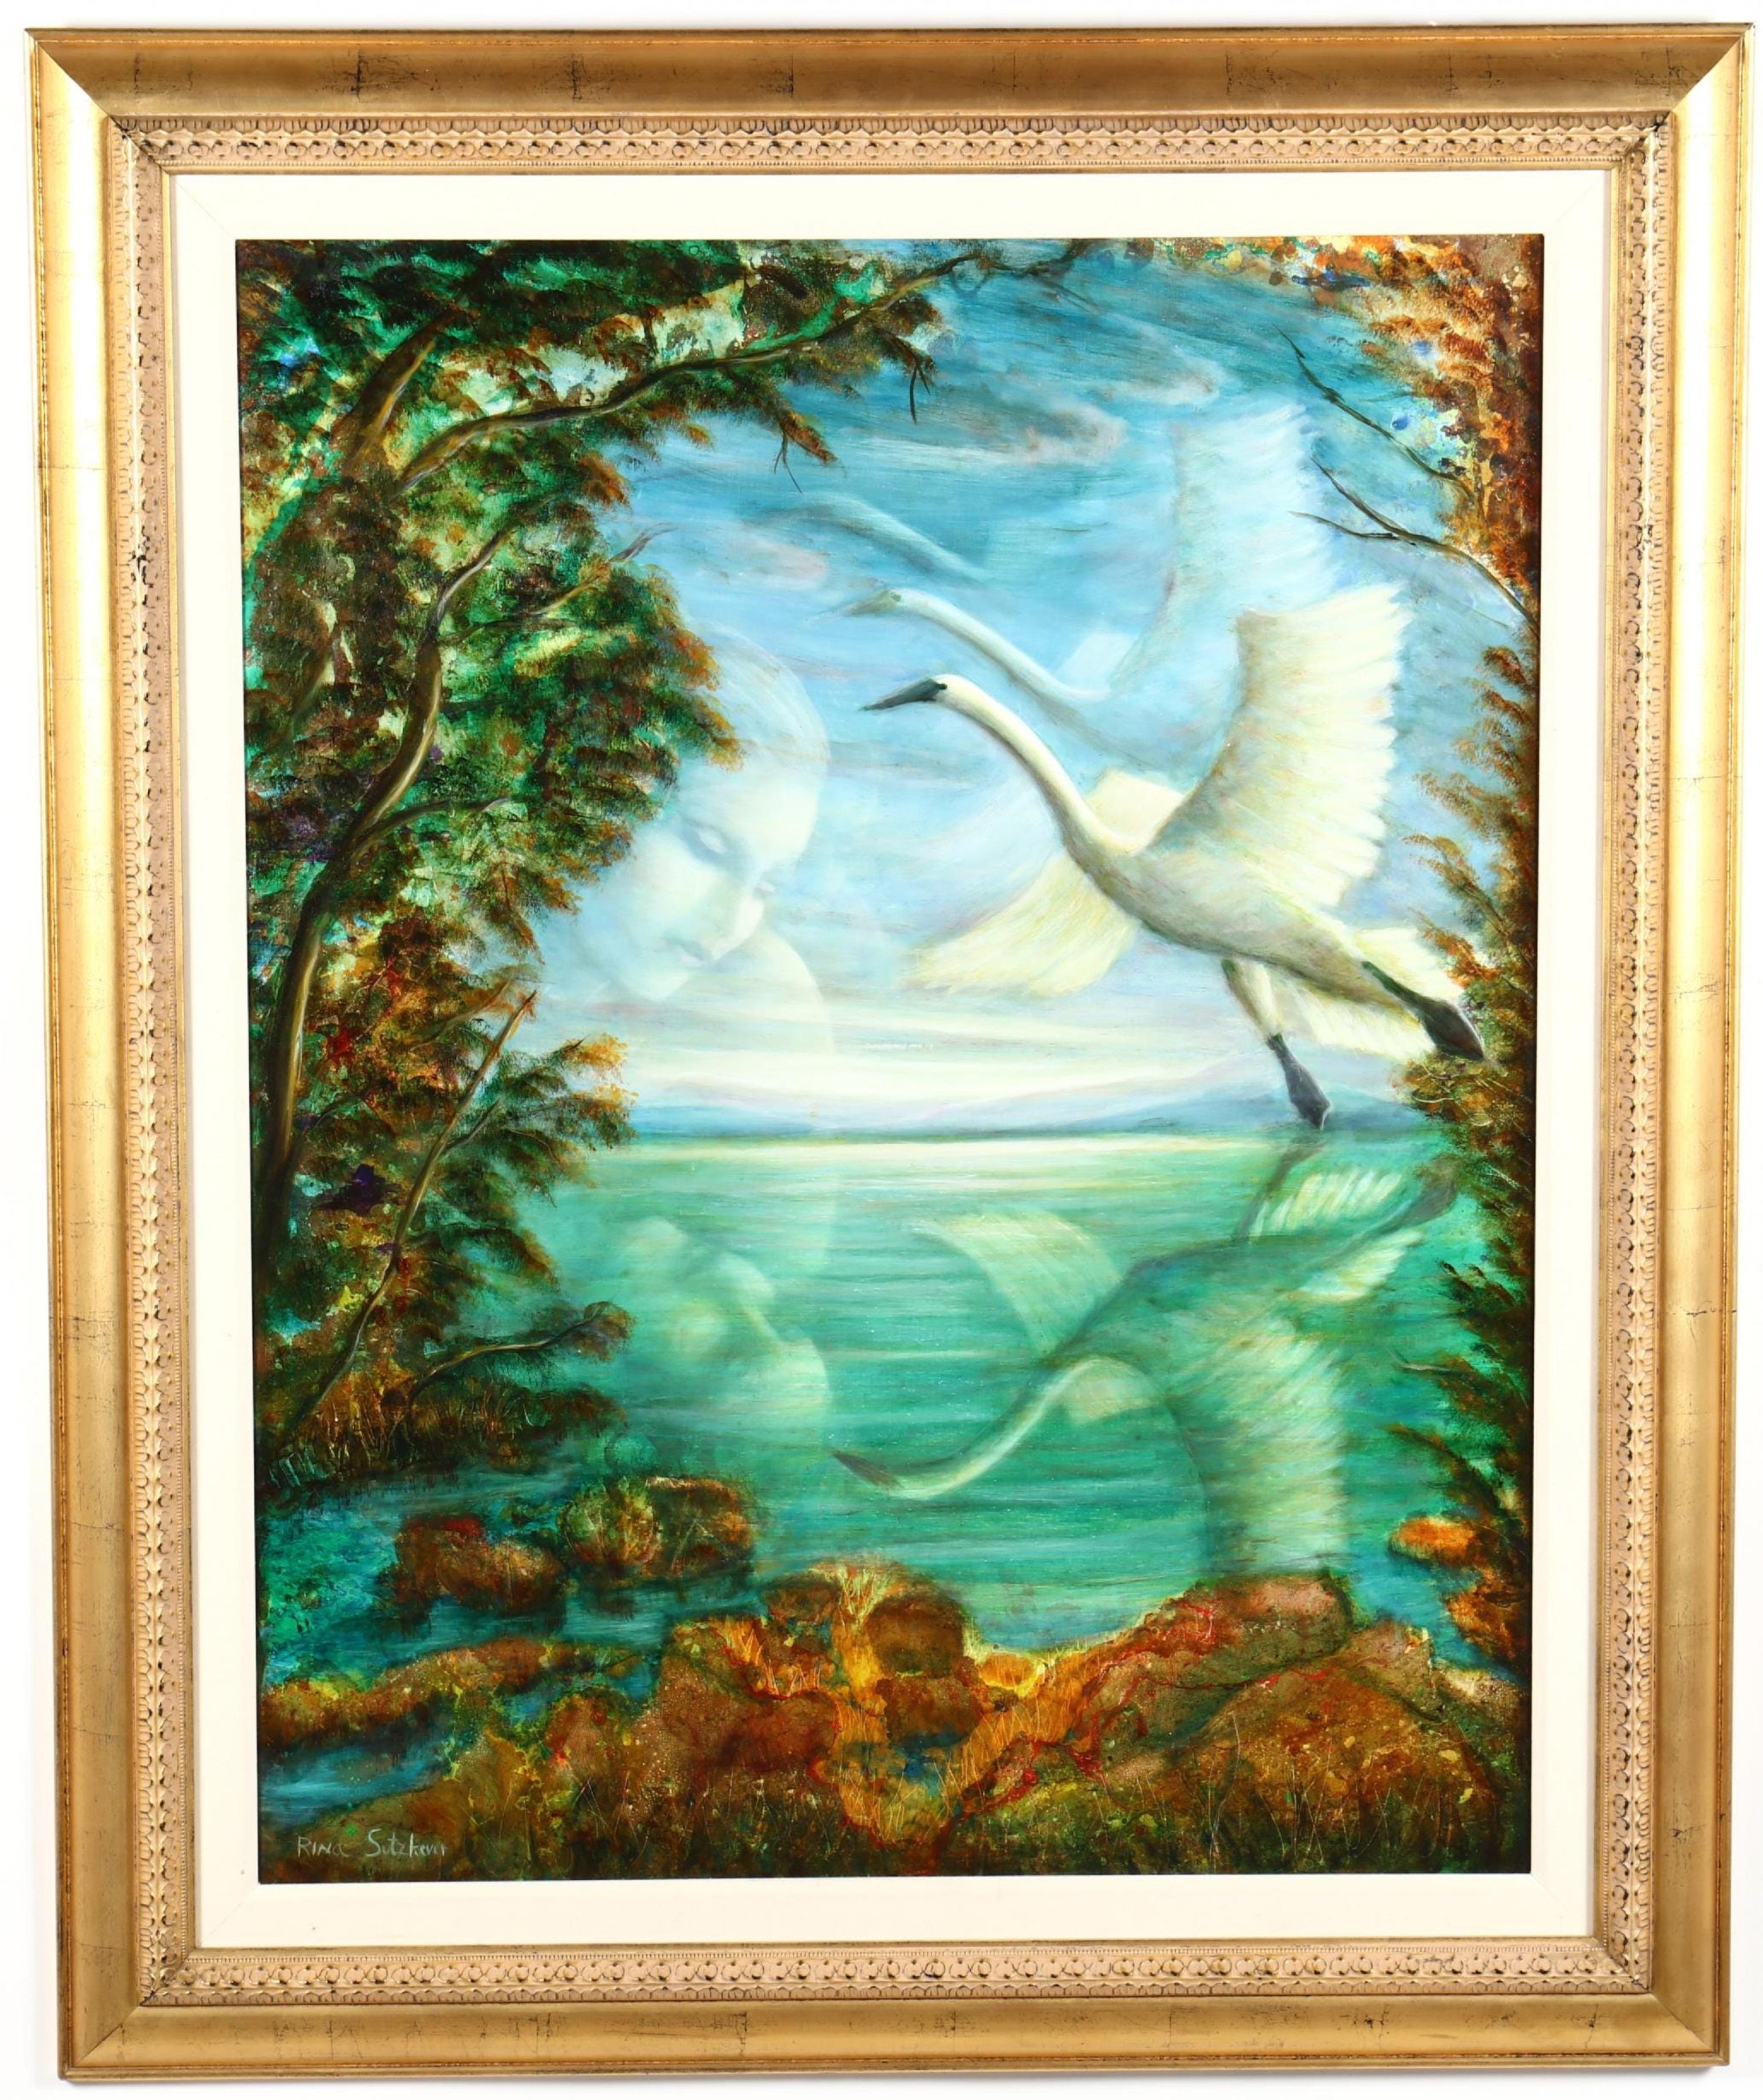 Large Russian Israeli Fantastic Realism Surrealist Oil Painting Girl with Swan